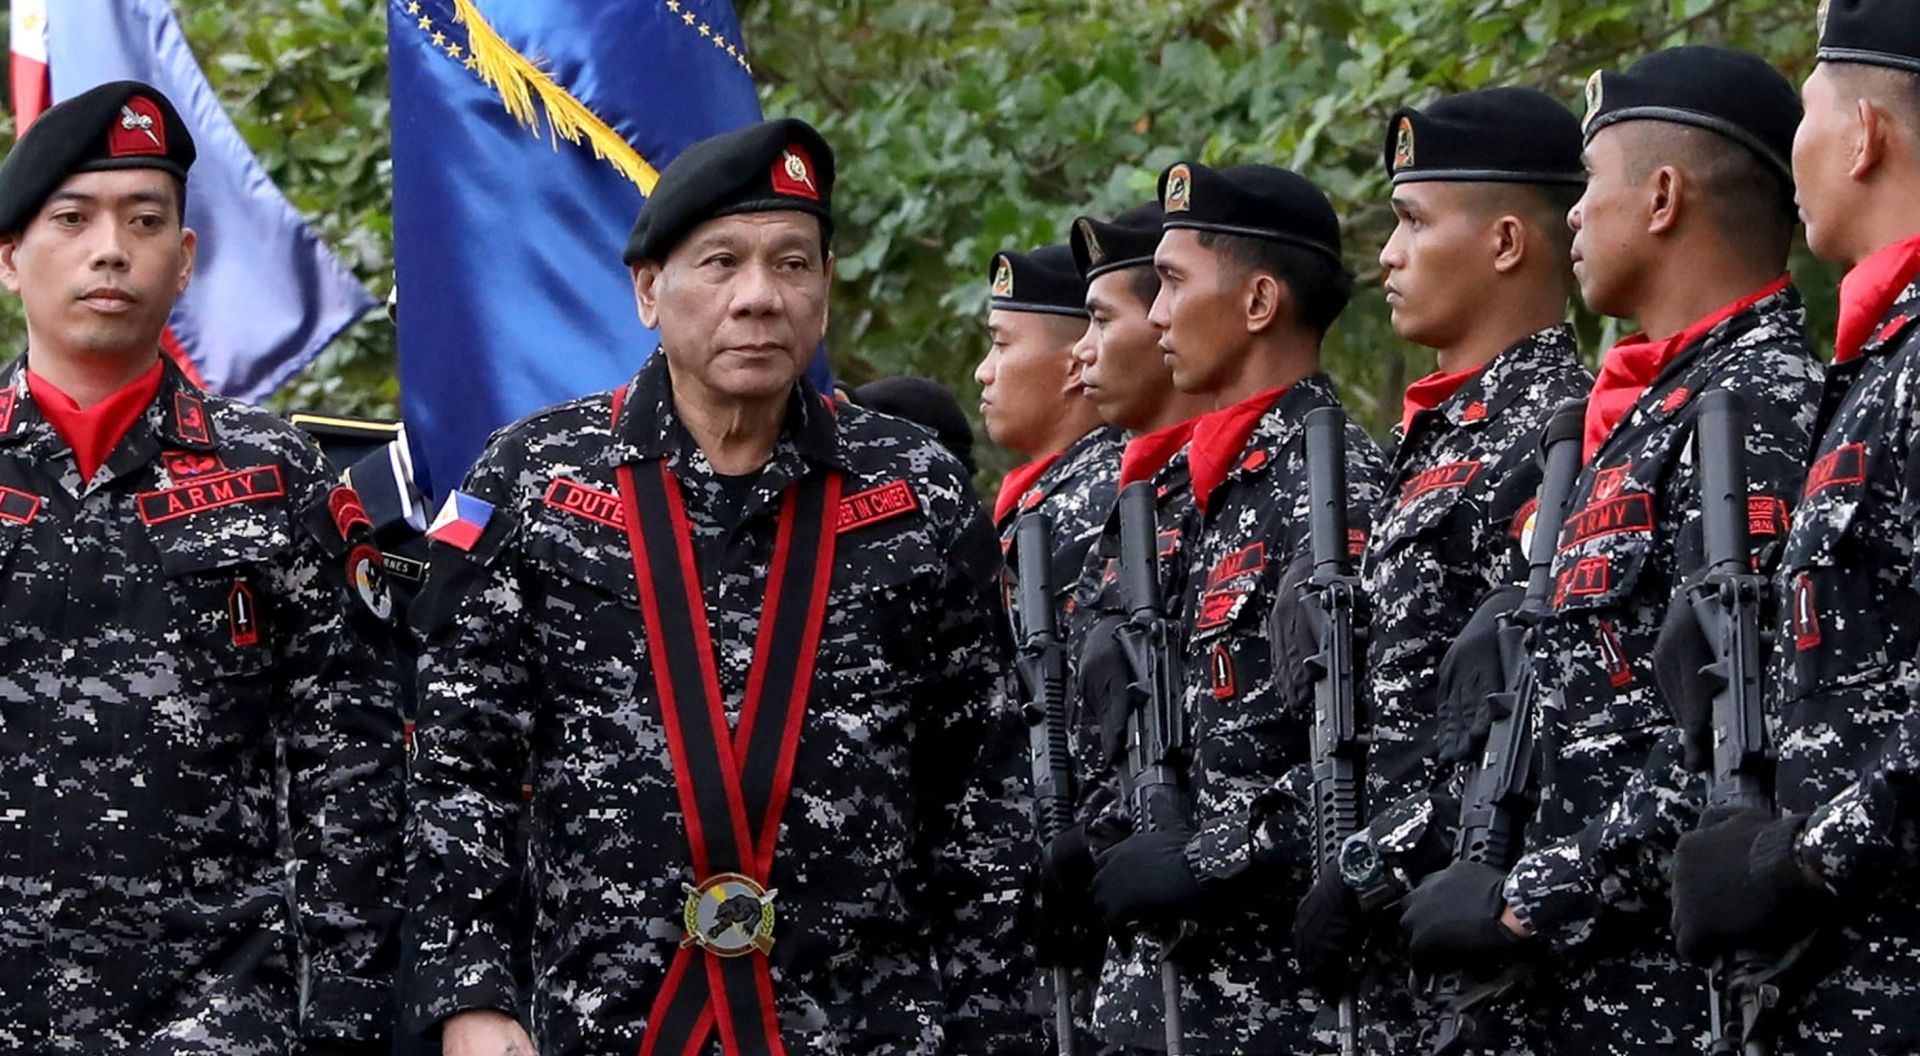 epa06348395 A handout photo made available by the Presidential Photographers Division (PPD) shows Philippine President Rodrigo Duterte (2-L) reviewing honor guards during the 67th anniversary of the First Scout Ranger Regiment (FSRR) at a military camp in San Miguel, Bulacan province, Philippines, 24 November 2017. On November 23, Duterte signed Proclamation Number 360 formally terminating peace talks with the communist block, the National Democratic Front (NDF), following continued attacks by its armed wing, the New Peoples Army (NPA), on government troops.  EPA/ALFRED FRIAS HANDOUT  HANDOUT EDITORIAL USE ONLY/NO SALES